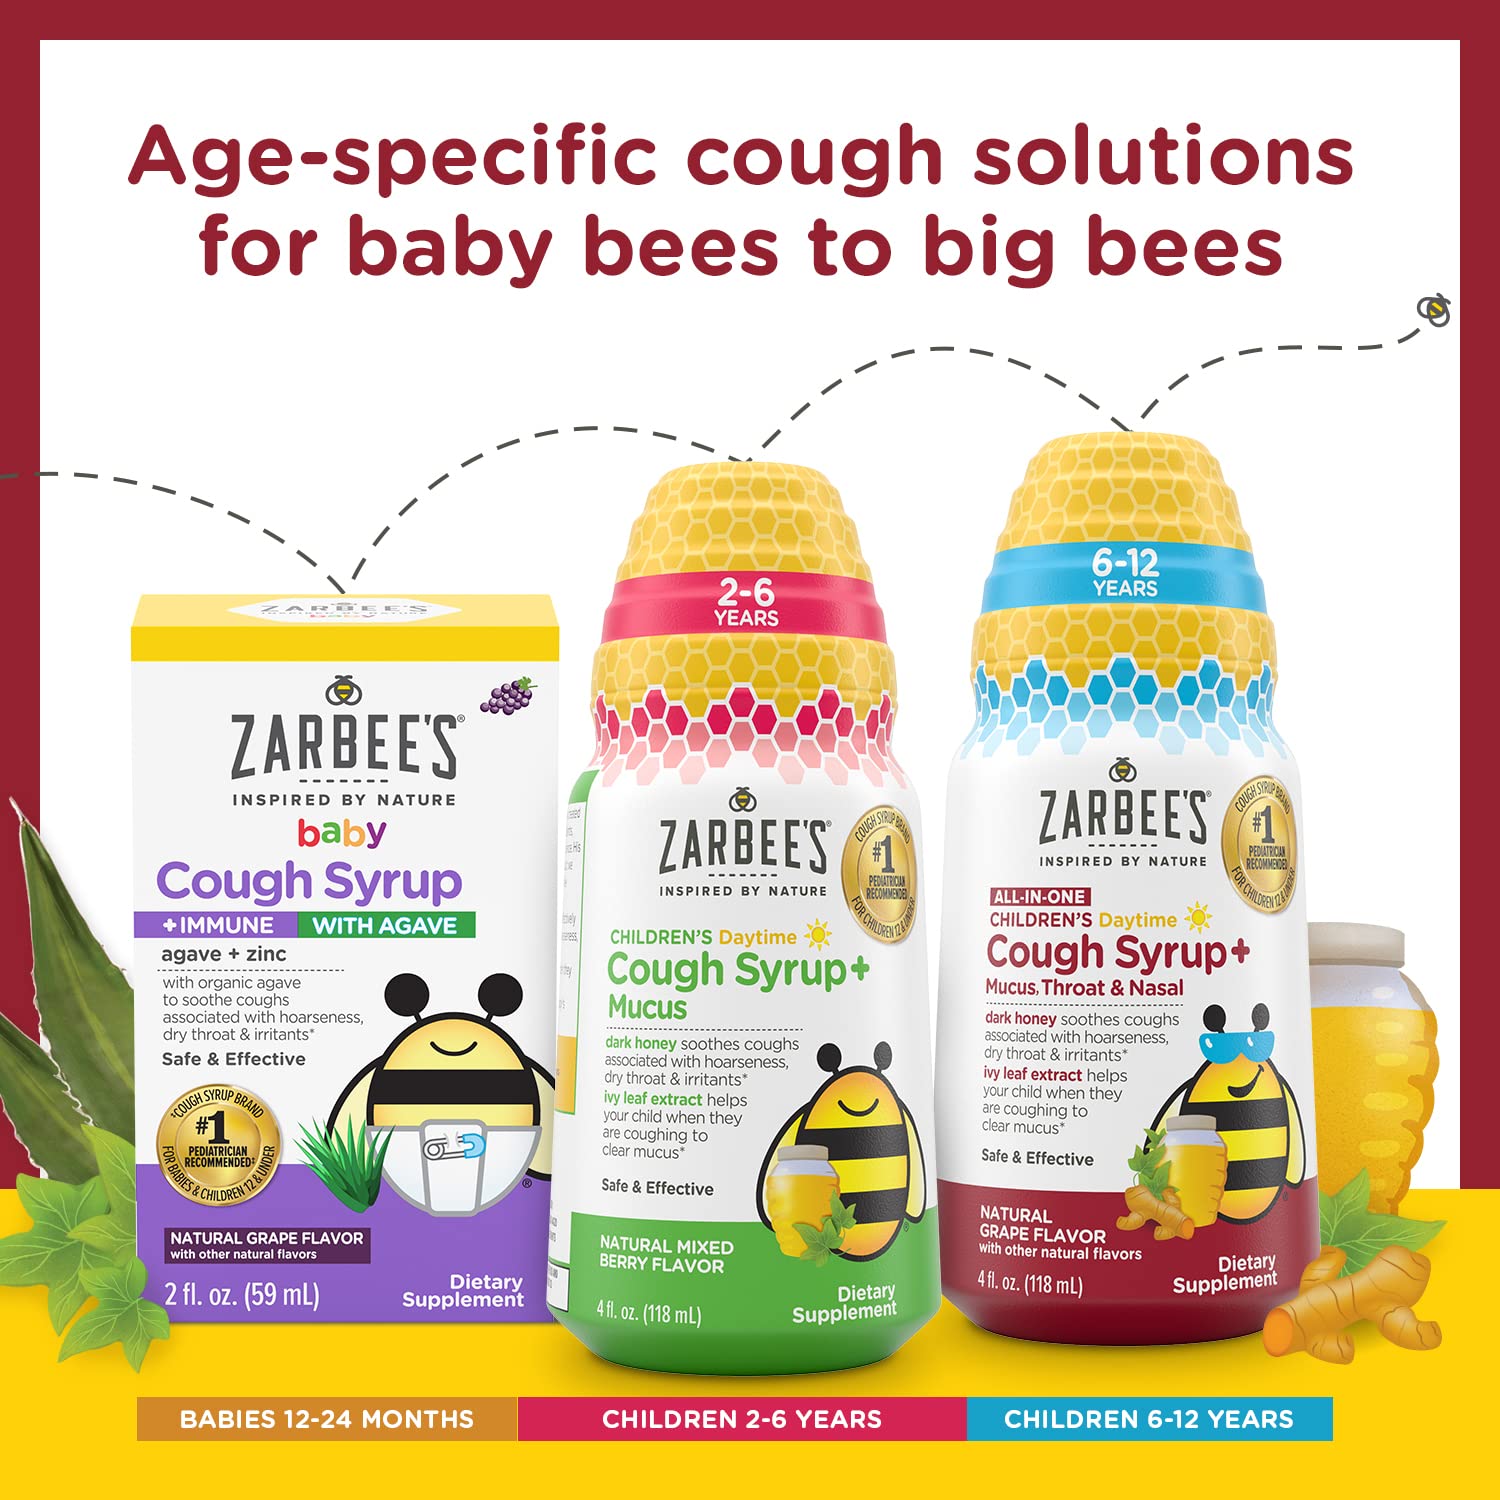 Zarbee's Kids All-in-One Day/Night Cough Value Pack for Children 6-12 with Dark Honey, Turmeric, B-Vitamins & Zinc, 1 Pediatrician Recommended, Drug & Alcohol-Free, Grape Flavor, 2x4FL Oz